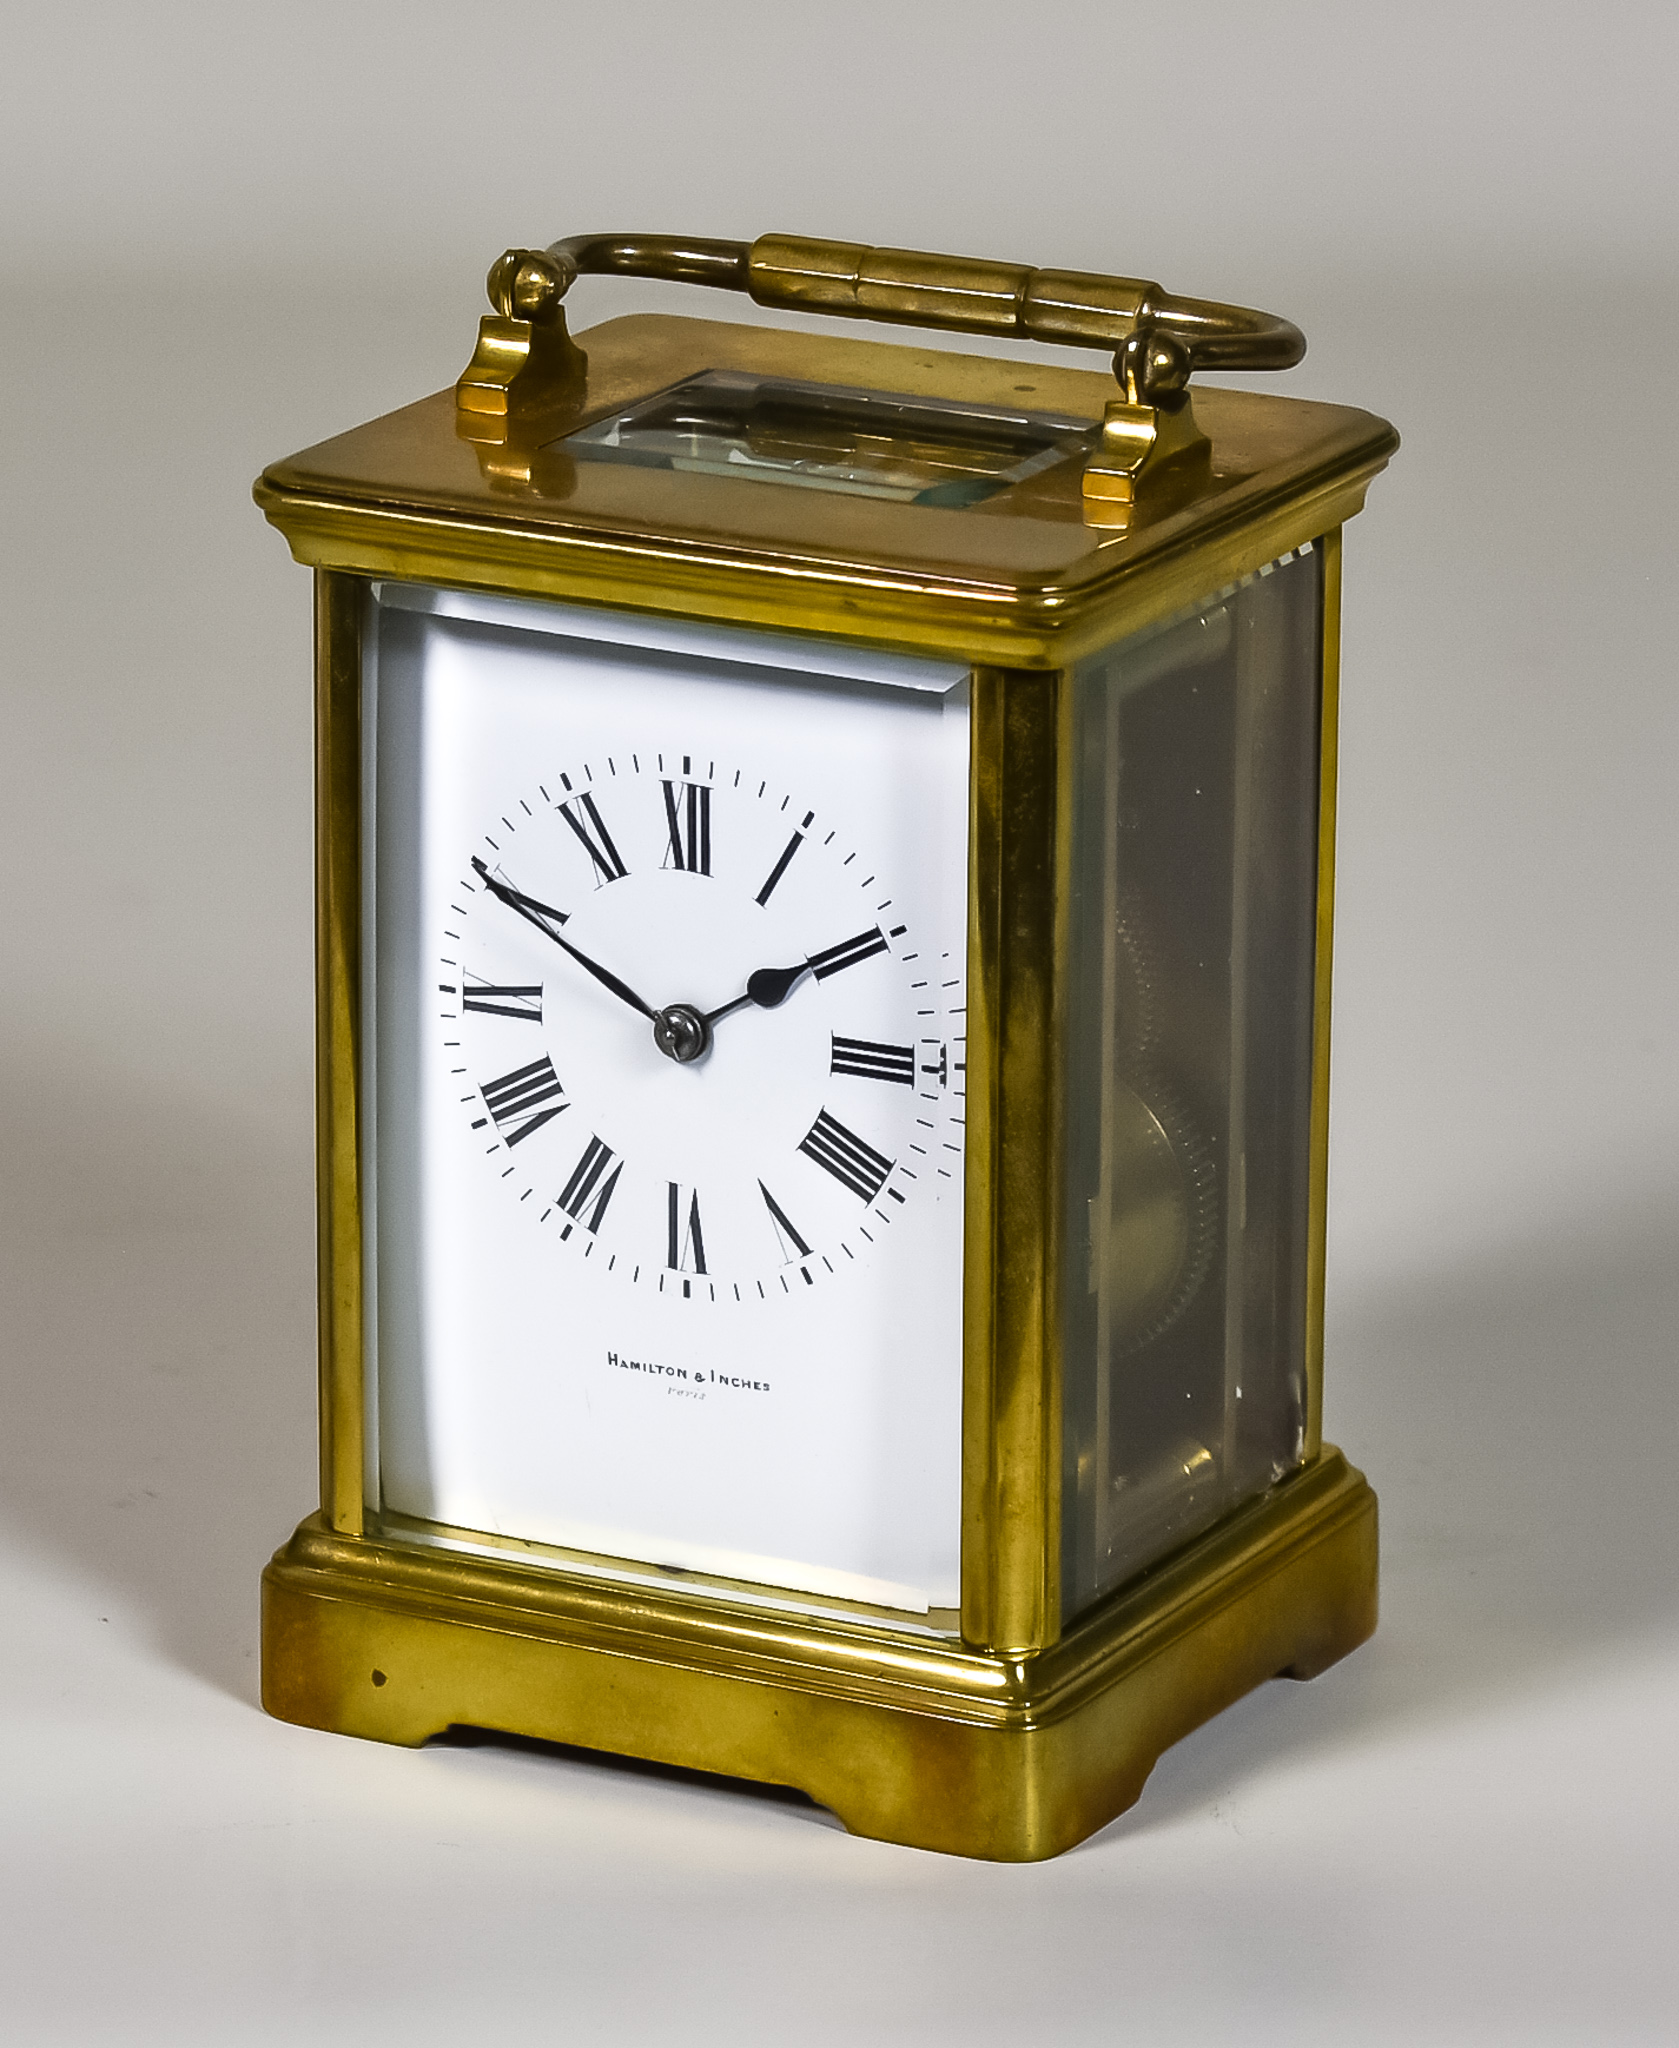 A Late 19th Century French Carriage Clock, by Hamilton & Inches, Paris, No.4666, the white enamel